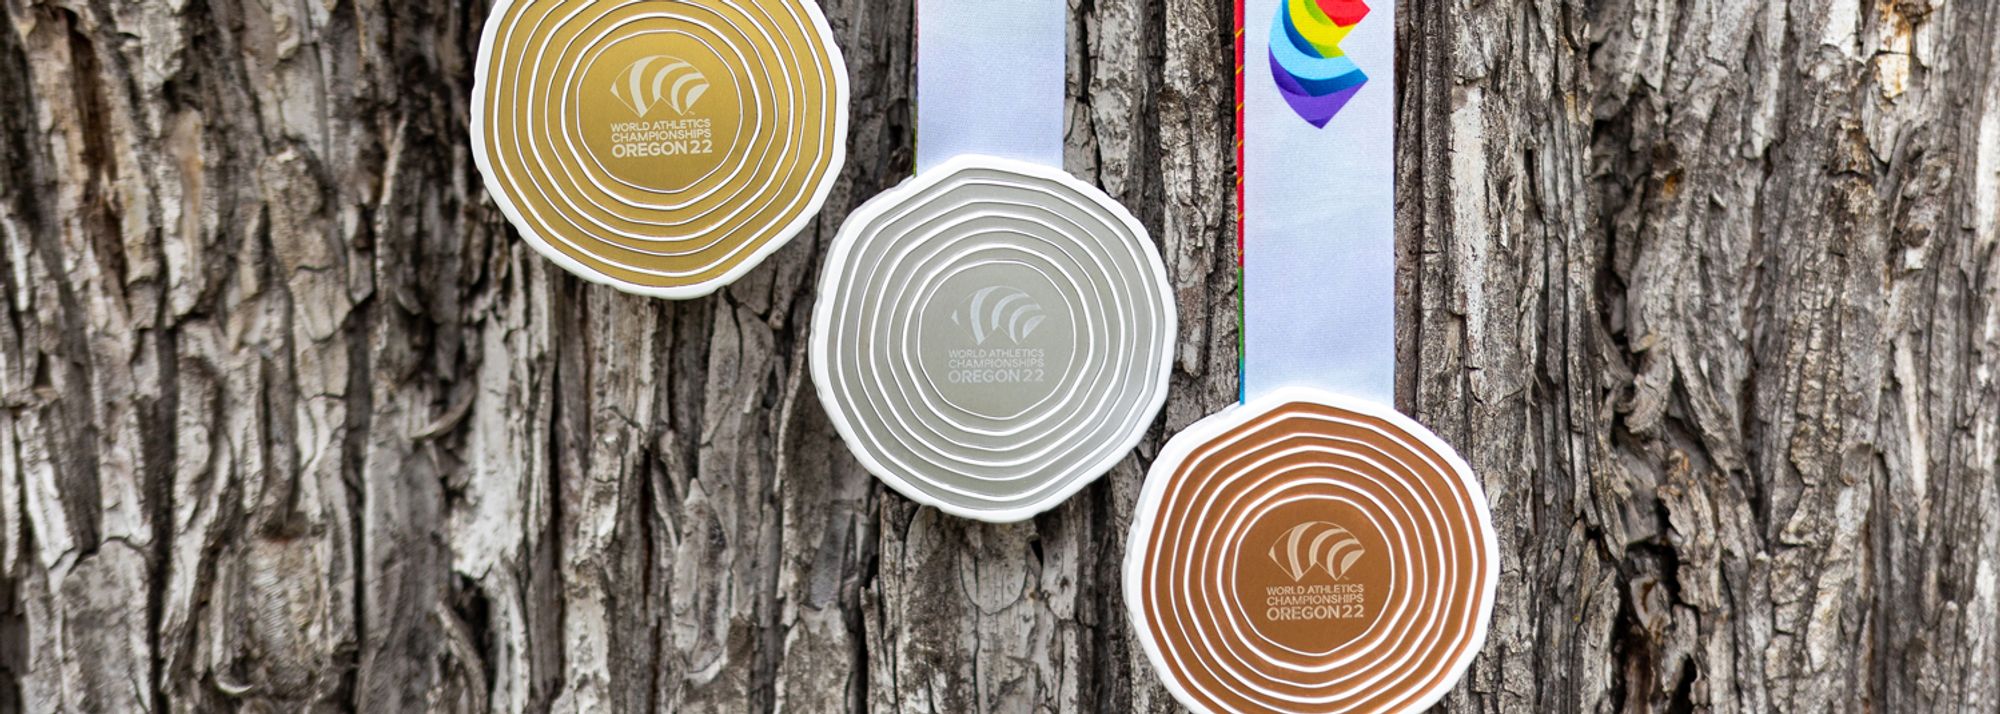 One side of the medals is inspired by the cross-section of a tree